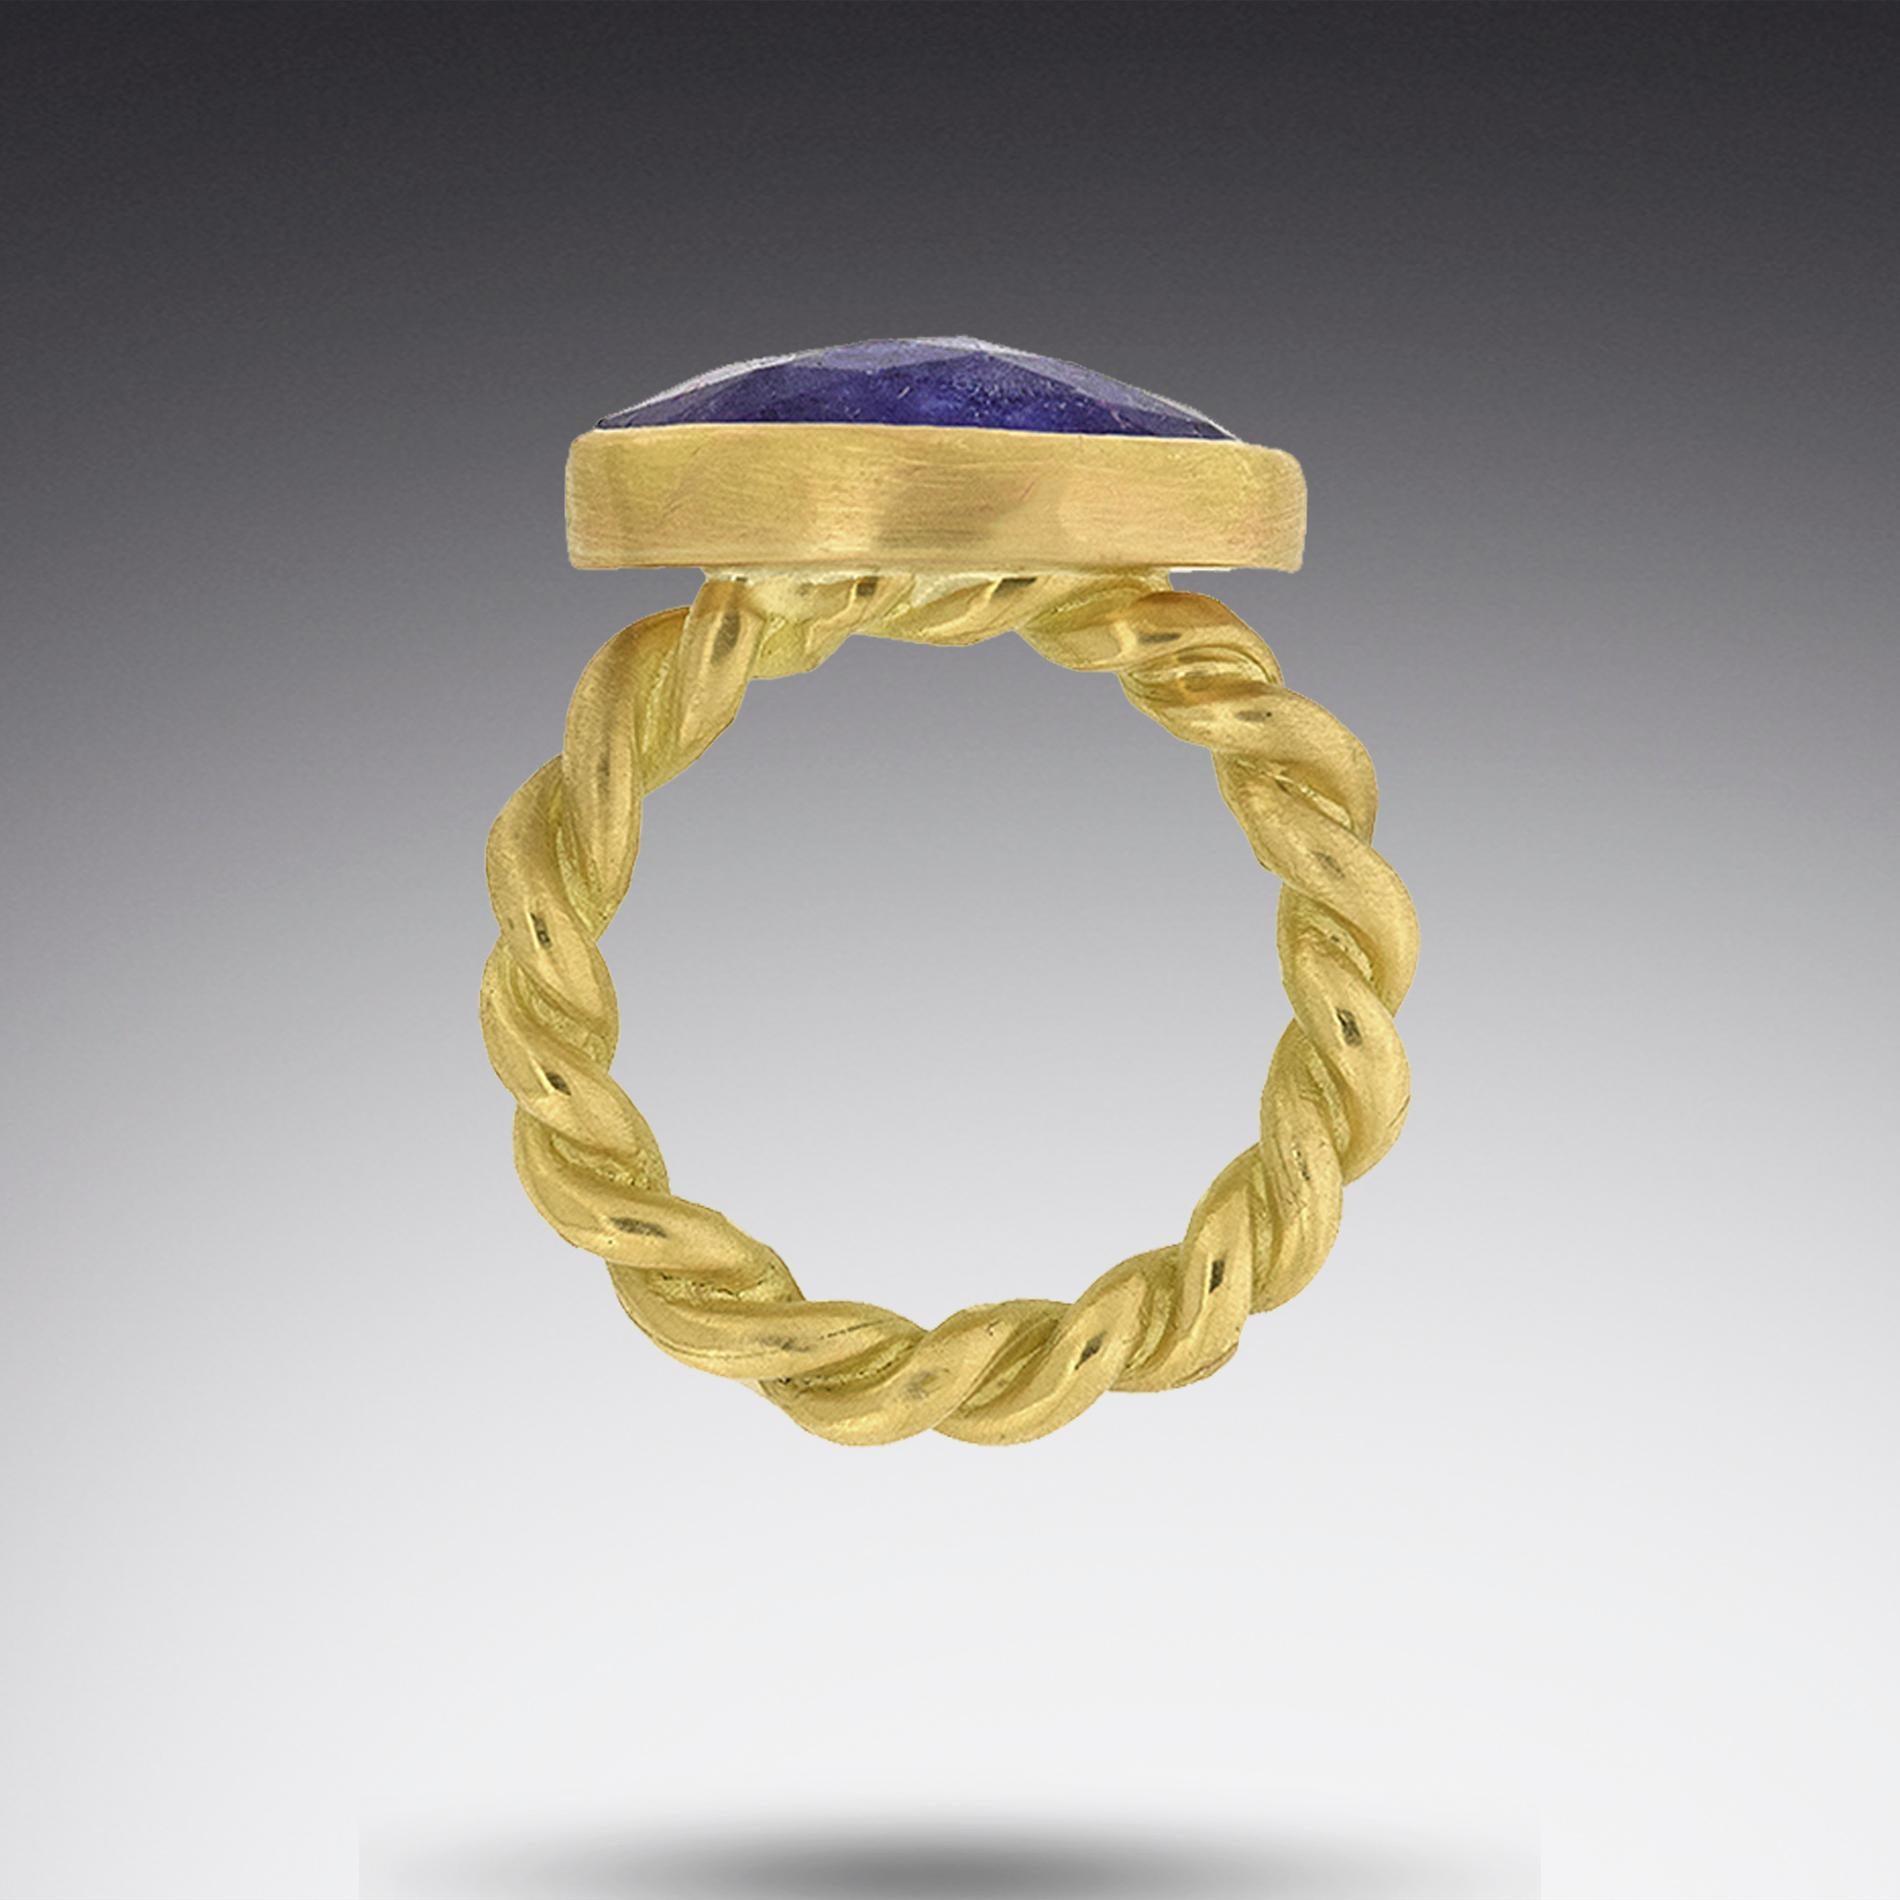 An 18K gold rope band supports this 12 carat Rose-cut Tanzanite.  A simple statement and one of a kind.  

Size 5-1/4